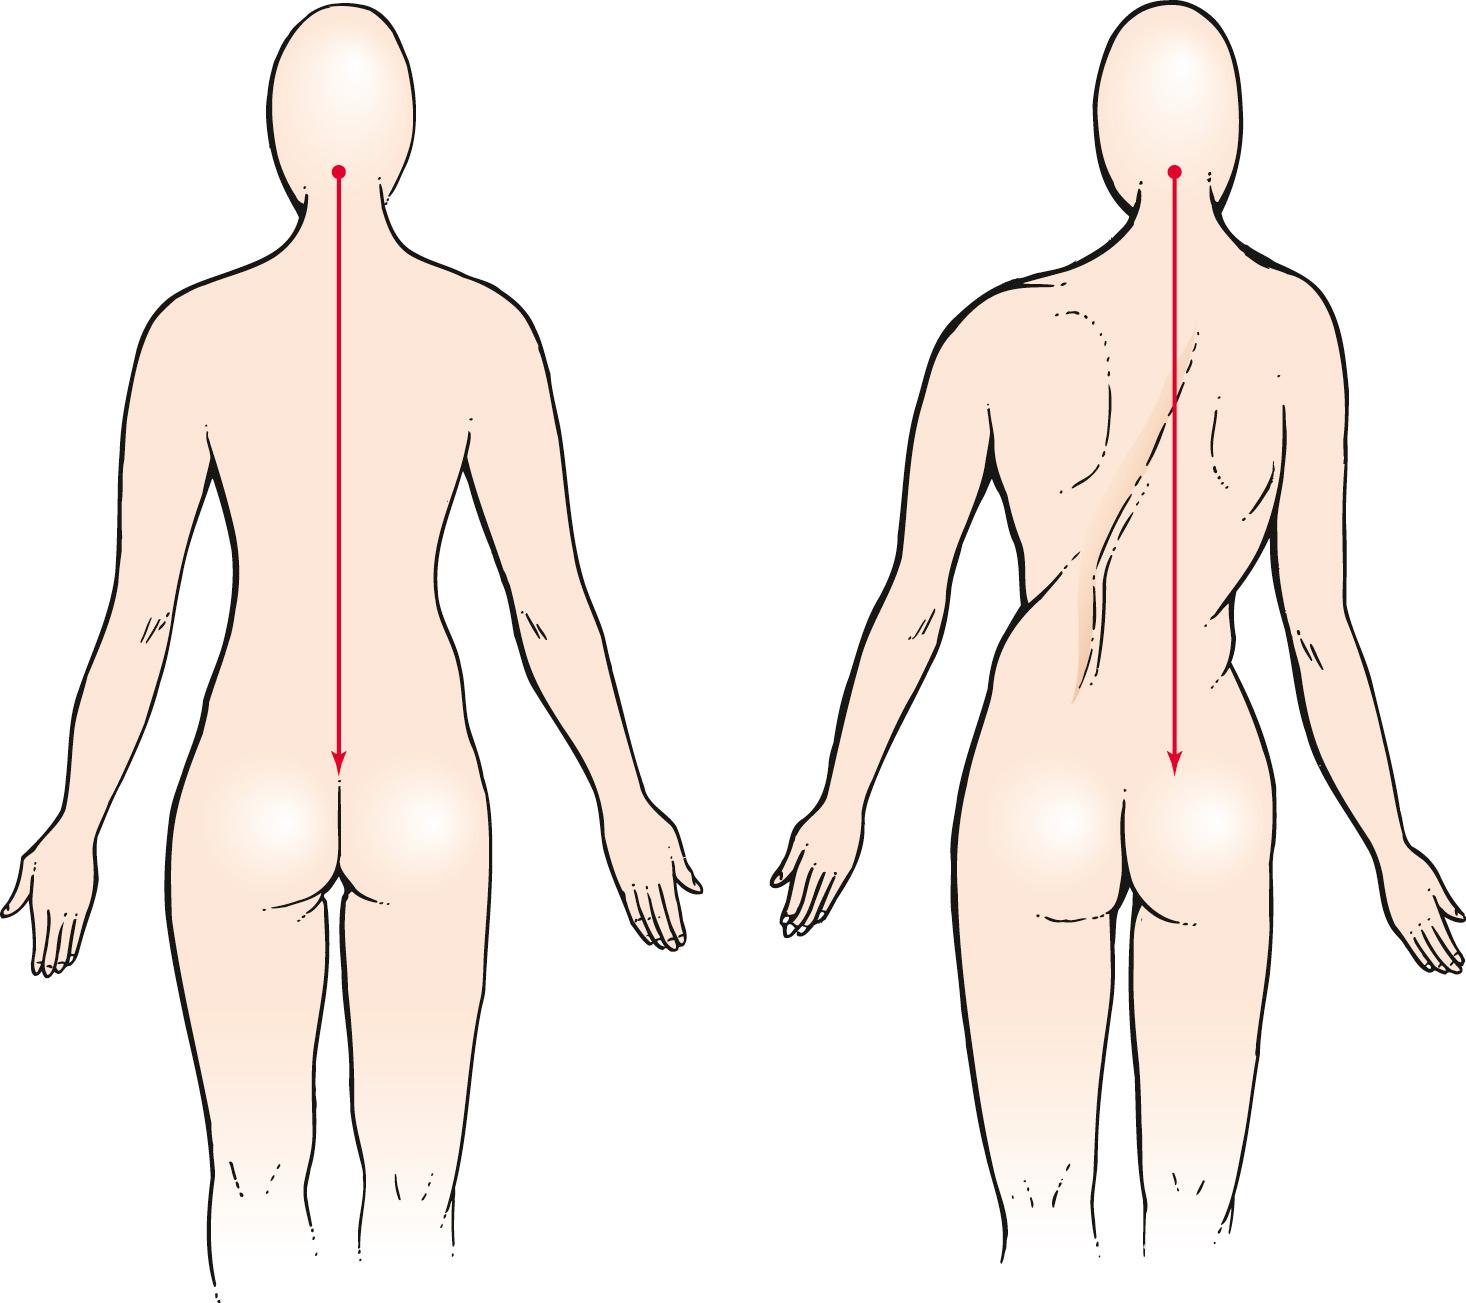 Fig. 20.24, Technique for Evaluating “Straightness” of the Spine.